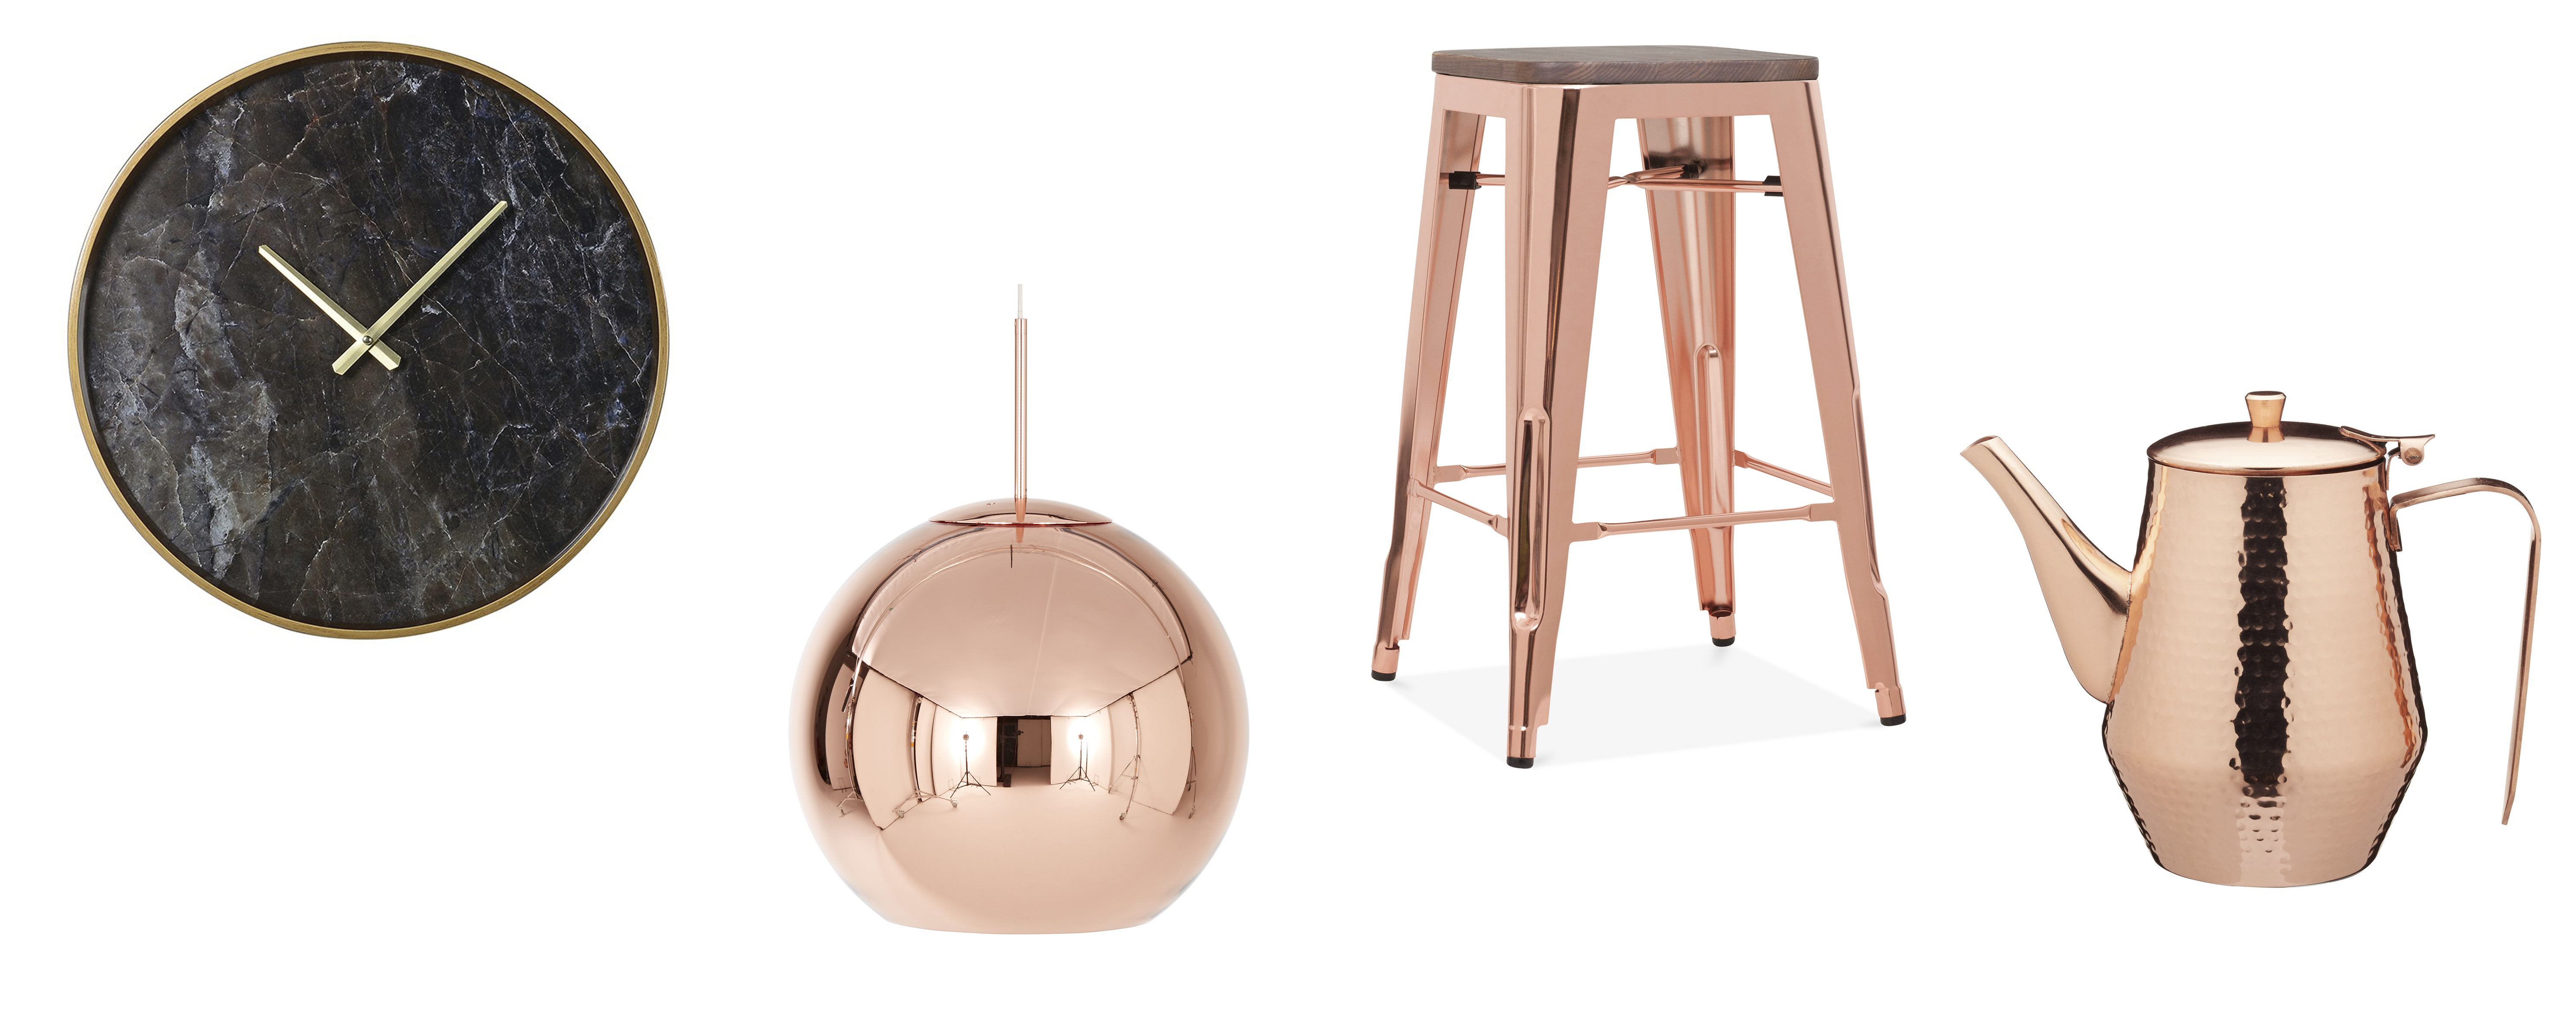 (L-R) Dark Marble Effect Wall Clock, £45, The Farthing; Tom Dixon Copper Pendant, £455, Rume; Tolix Style Metal Bar Stool, Rose Gold, £69, Cult Furniture; Le’Xpress 1.1 Litre Stainless Steel Hammered Copper Finish Coffee Pot, £39.99, visit Kitchen Craft for stockists (The Farthing/Rume/Cult Furniture/Kitchen Craft/PA)